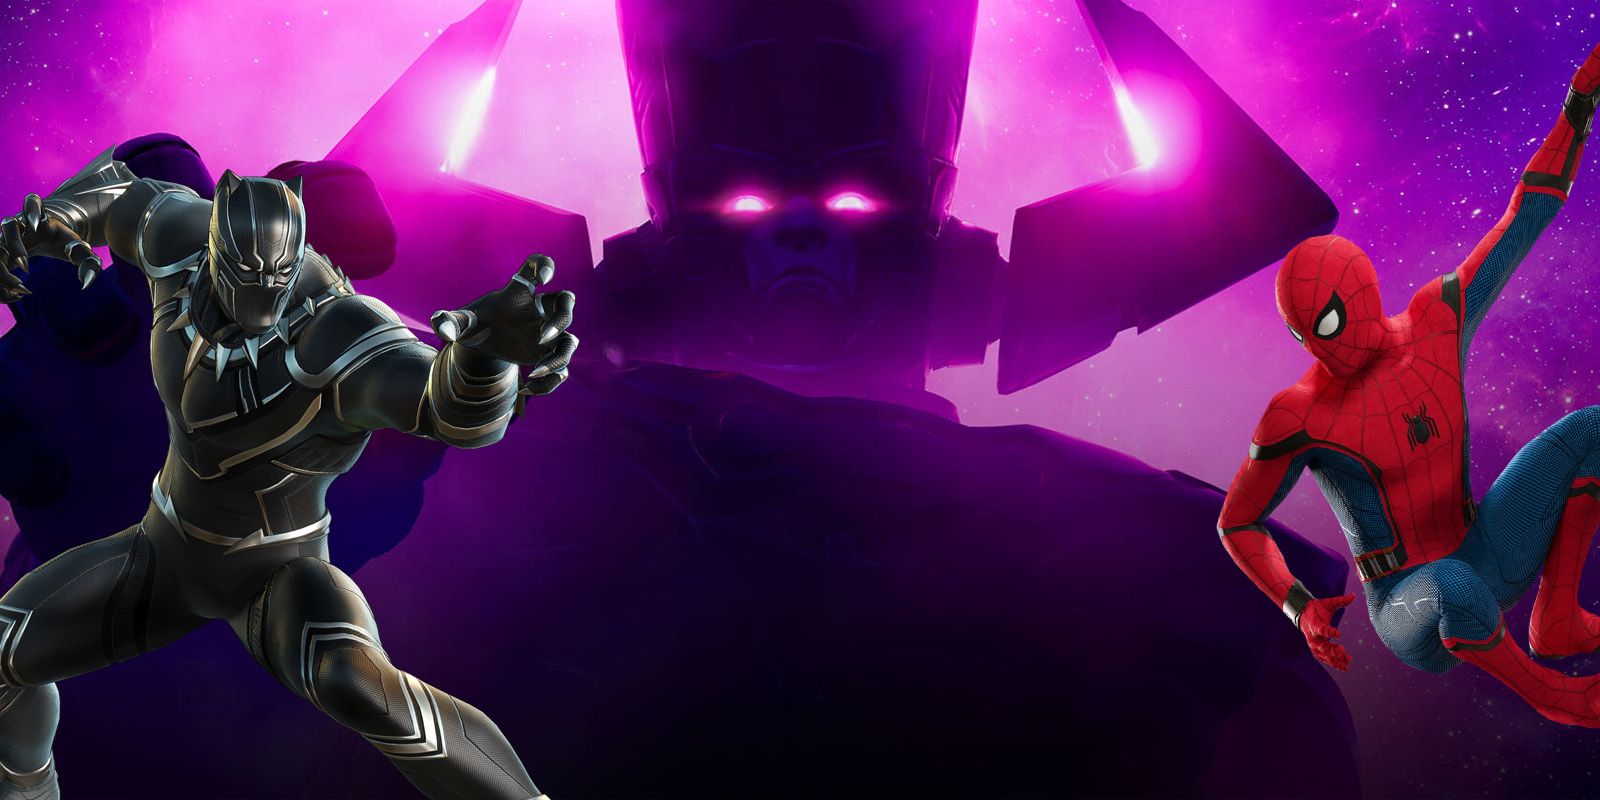 Spider-Man and Black Panther vs Galactus in Fortnite